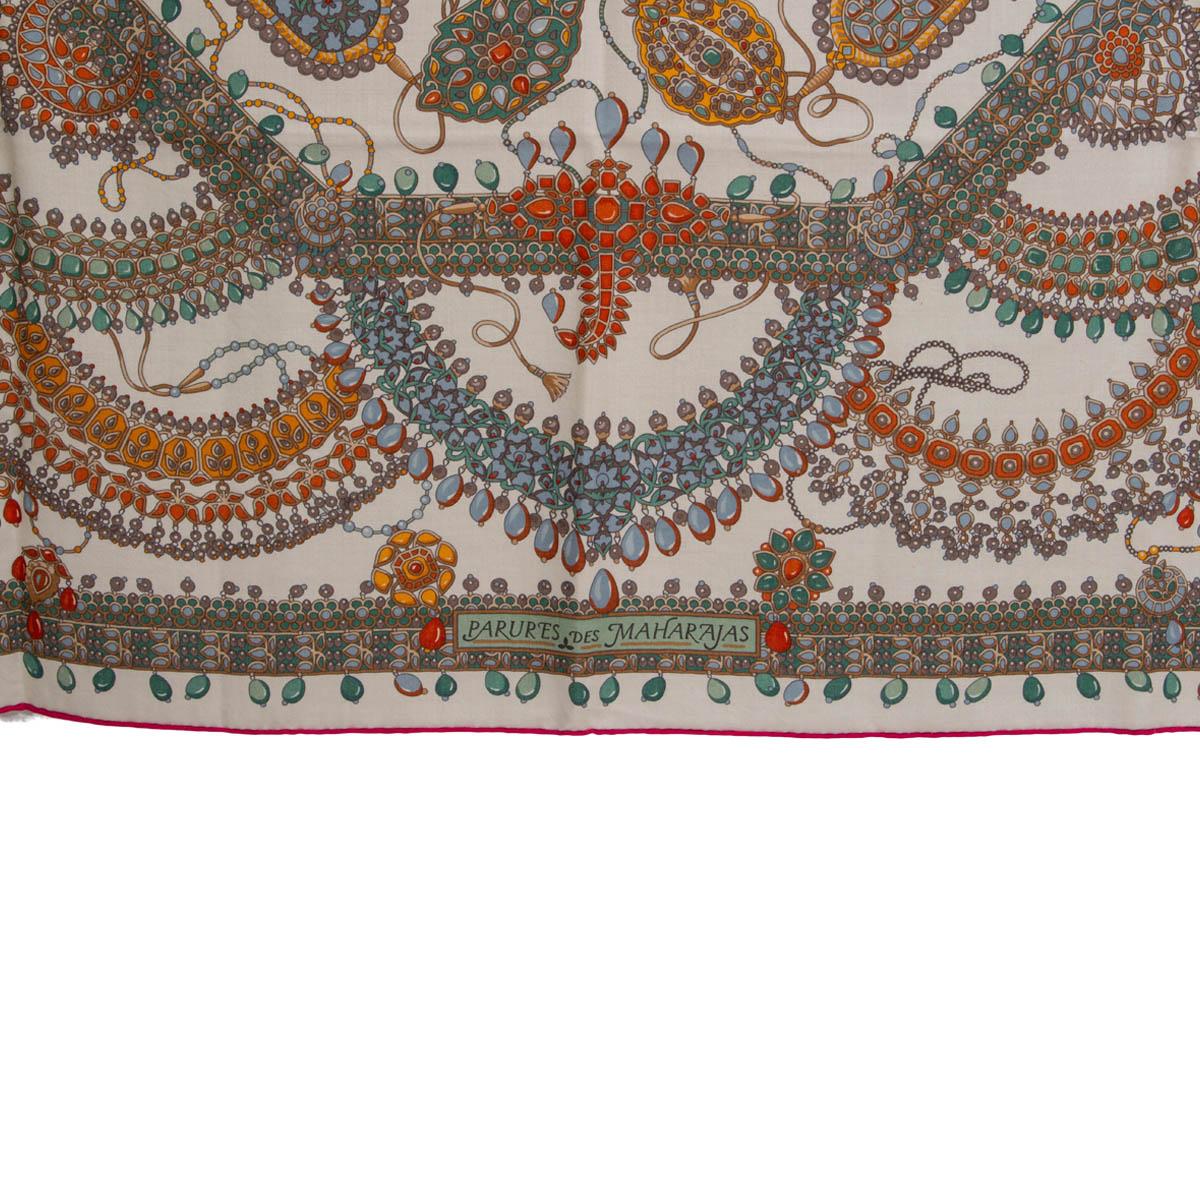 100% authentic Hermes 'Parures des Maharajas 140' shawl by Catherine Baschet in off-white cashmere (65%) and silk (35%) with pink hem and details in coral, orange, various shades of green and light blue. Has been worn and is in excellent